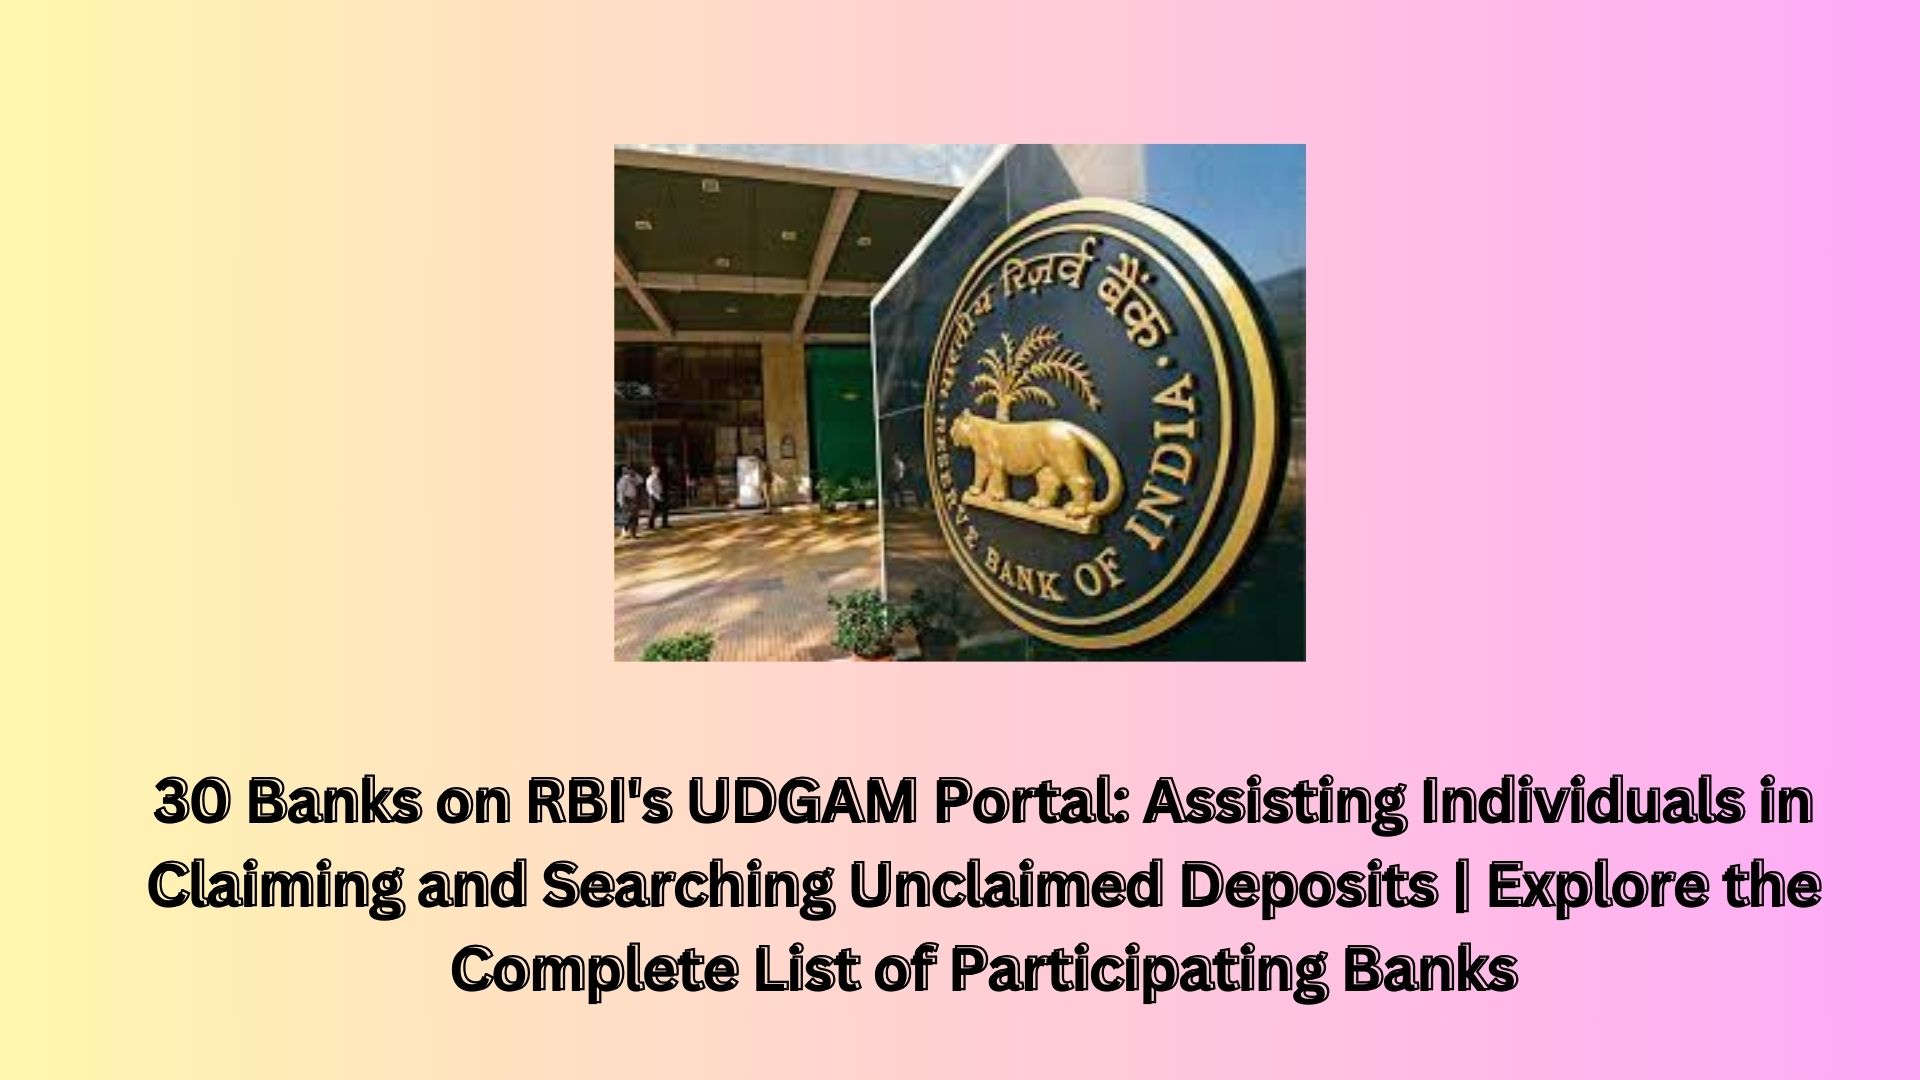 30 Banks on RBI's UDGAM Portal: Assisting Individuals in Claiming and Searching Unclaimed Deposits | Explore the Complete List of Participating Banks